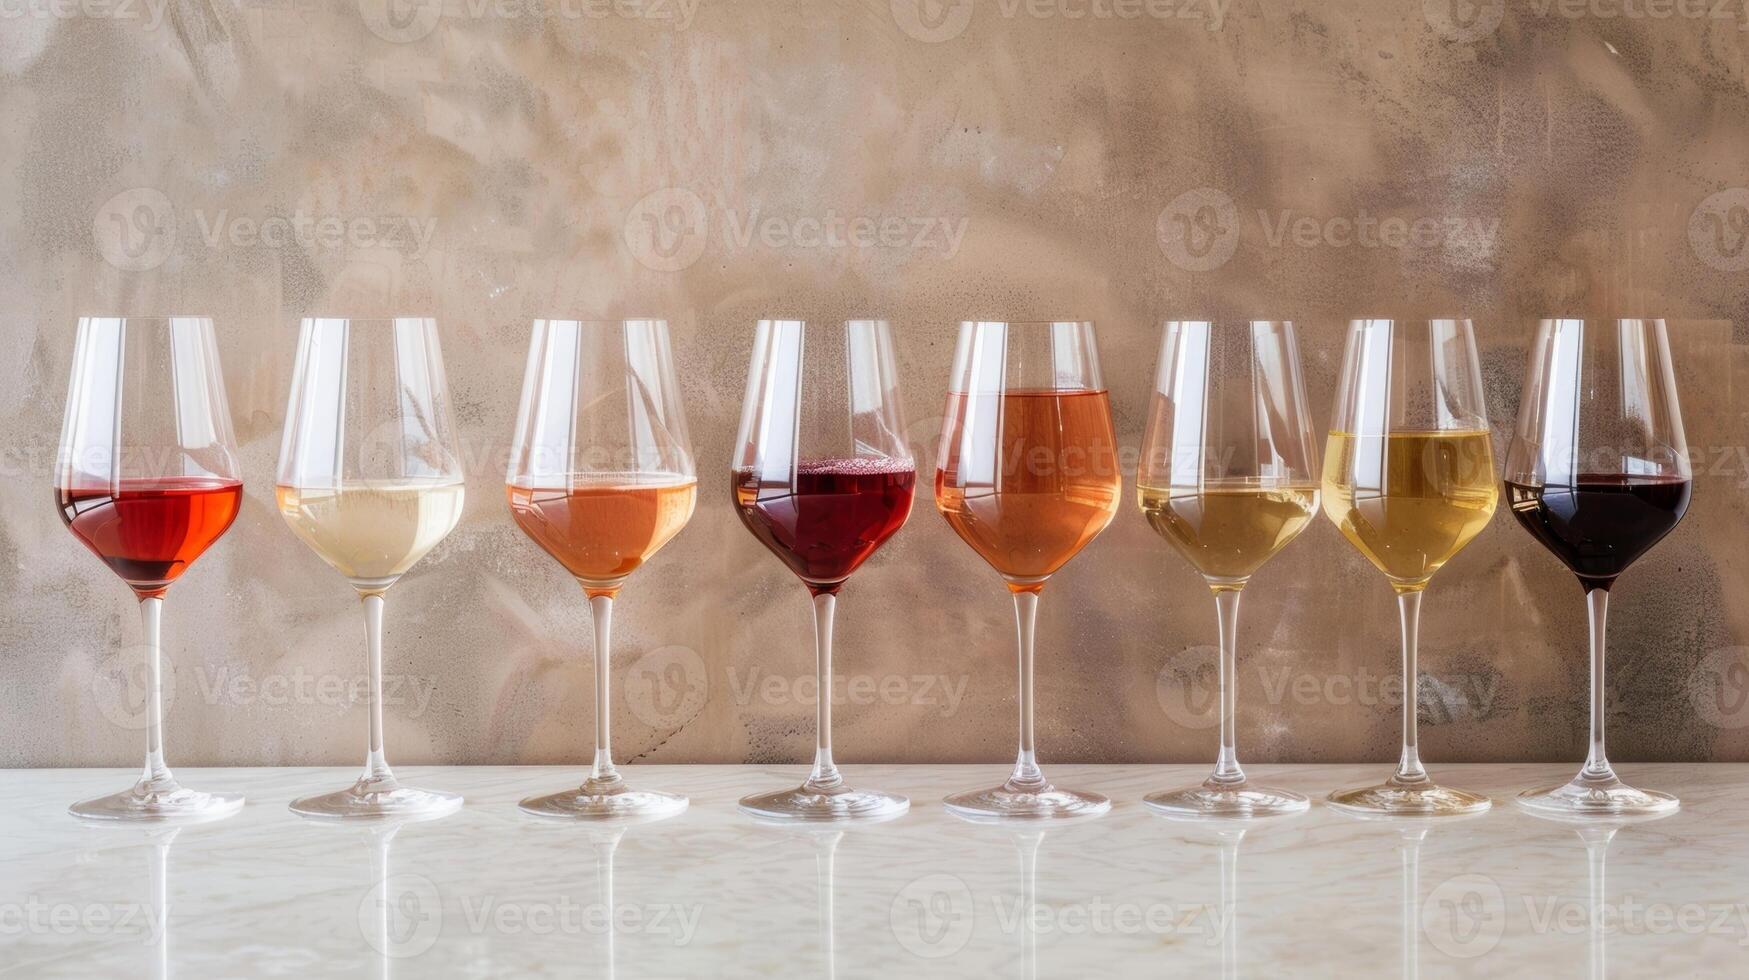 A variety of wine glasses are lined up on the table each representing a different type of wine that the host has carefully chosen for the book club photo